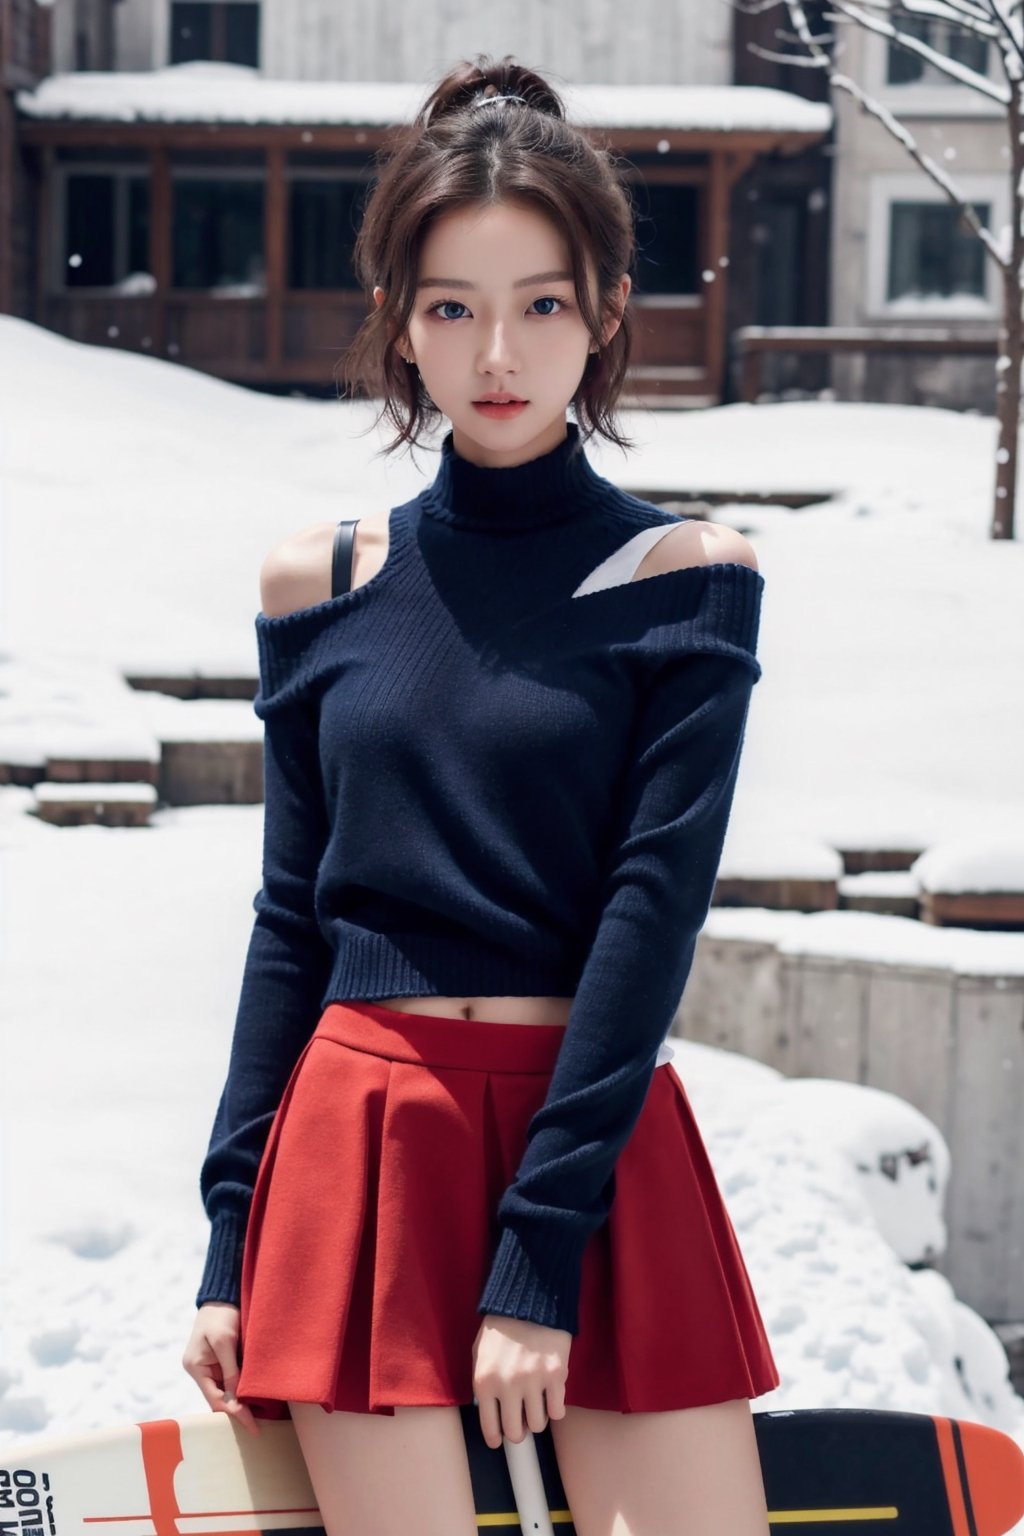 8K Cinema Reality, High resolution, high quality, a girl riding a qickboard on a snowy day, Korean idol style, Full-body shot, small hands, a little pretty hands, small natural five little finger, short hair up, see blue_eyes, red color sweater with a Open shoulder, mini skirt, bright white skin,